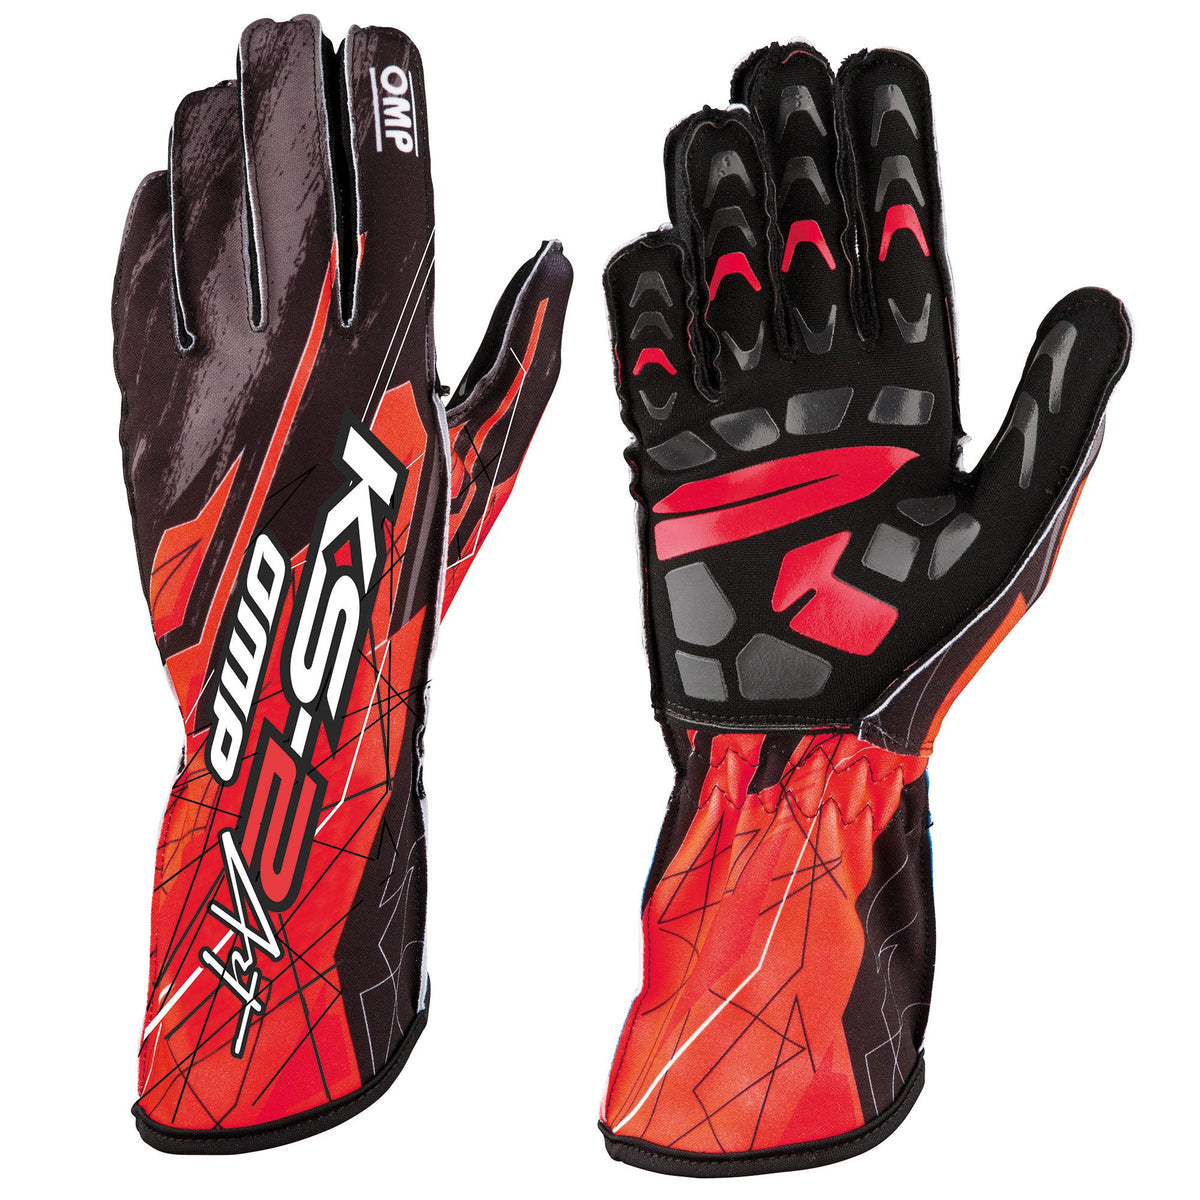 Kart gloves with printed graphic